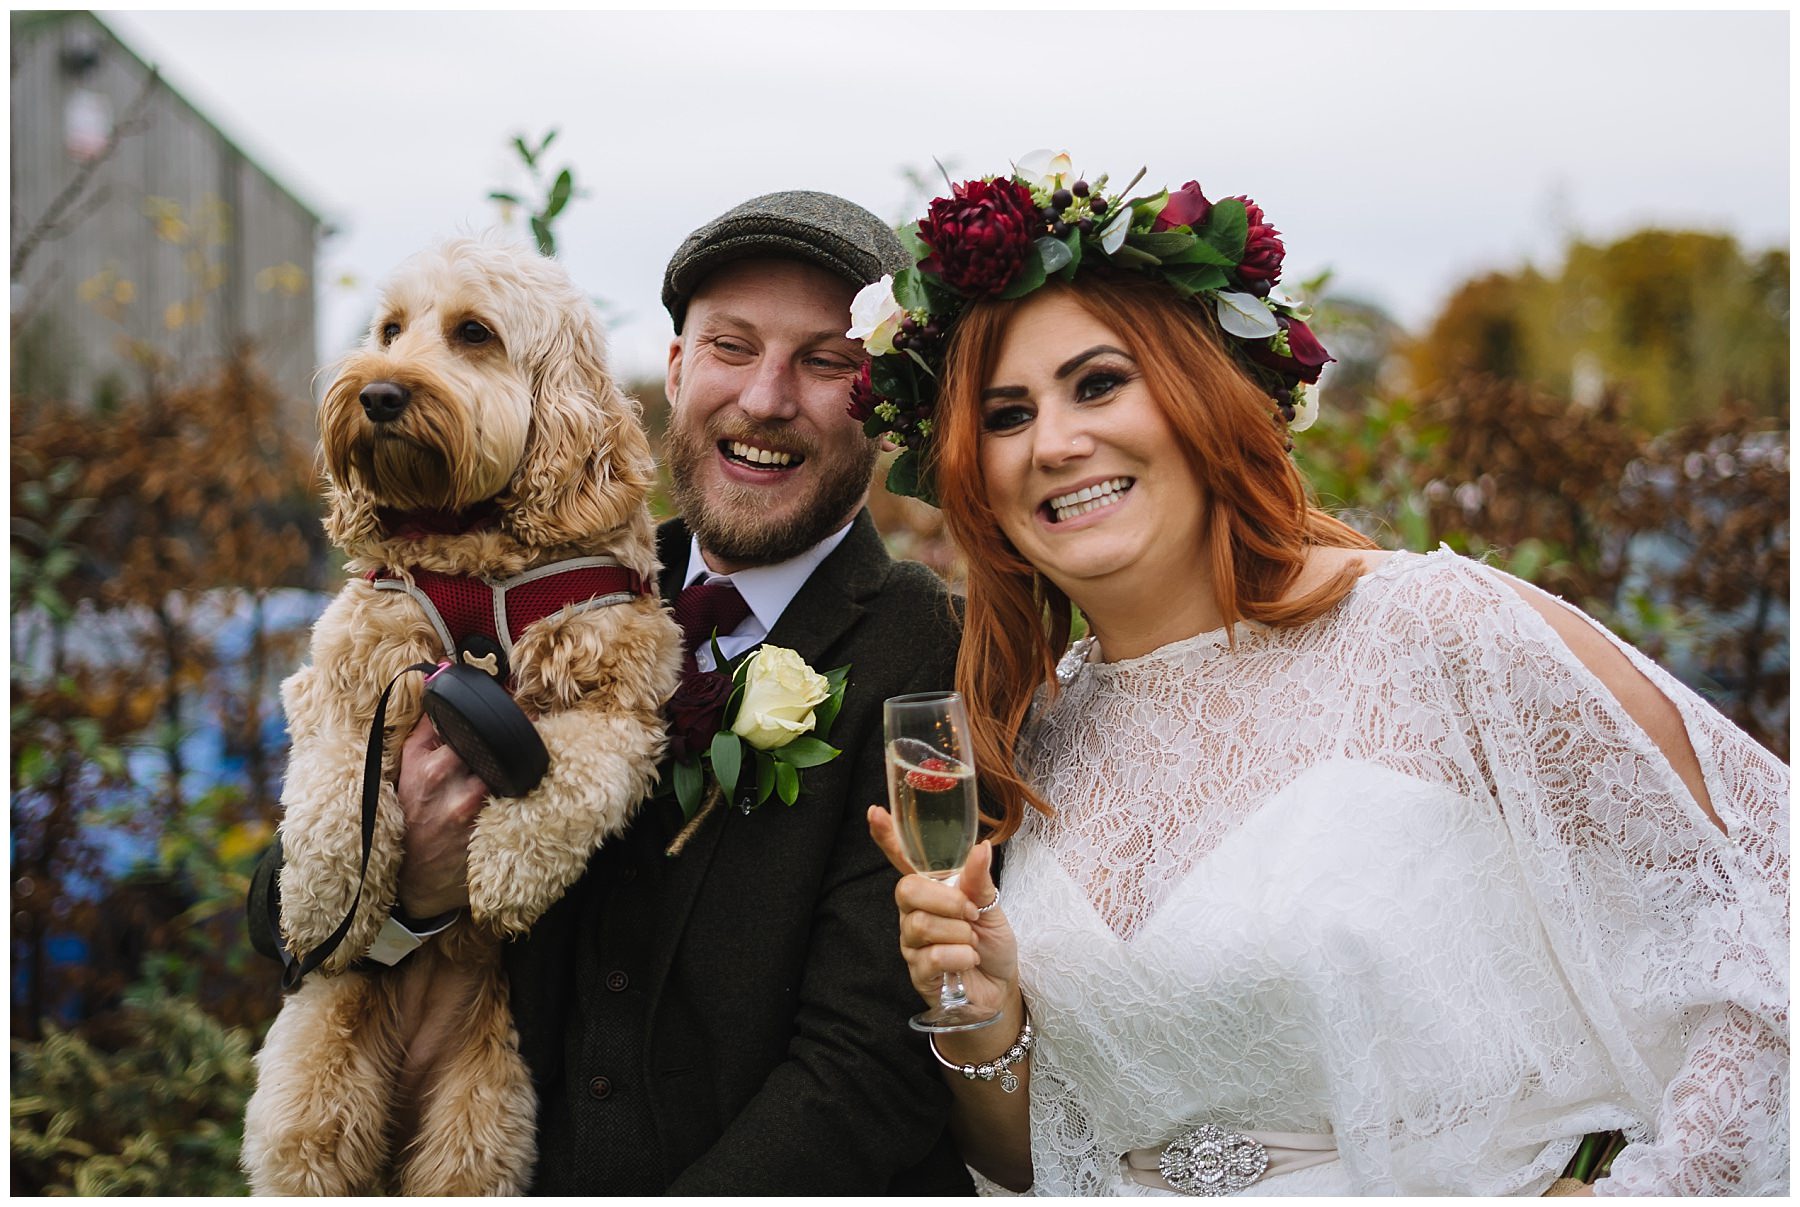 Dogs at weddings inspiration